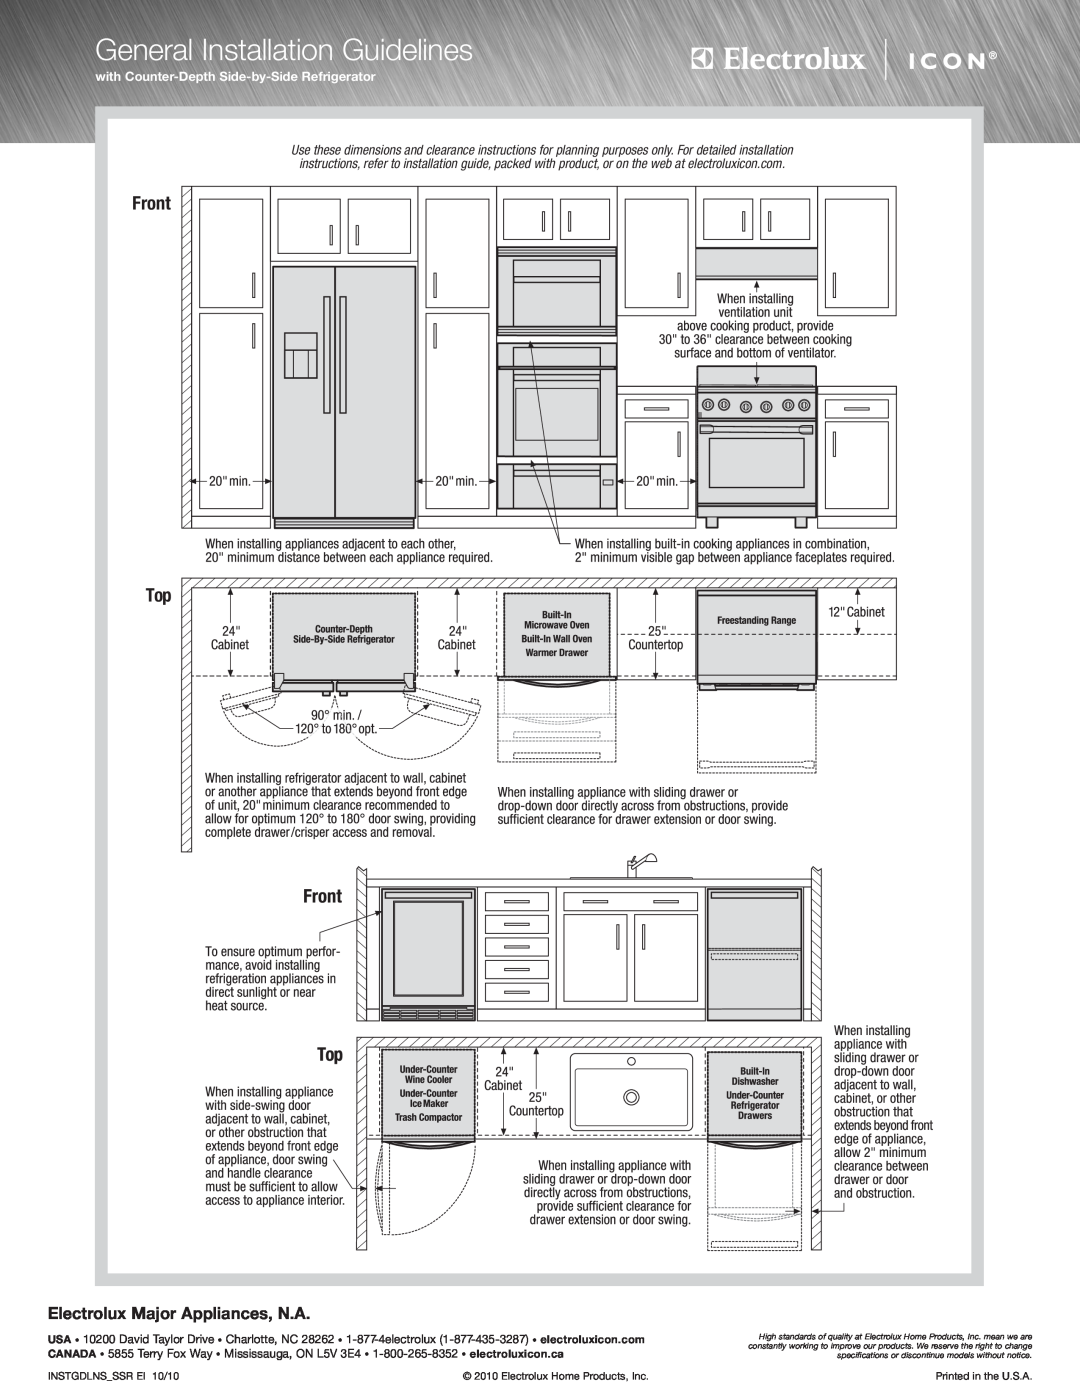 Electrolux E15IM60GPS specifications General Installation Guidelines, Electrolux Major Appliances, N.A, Front 